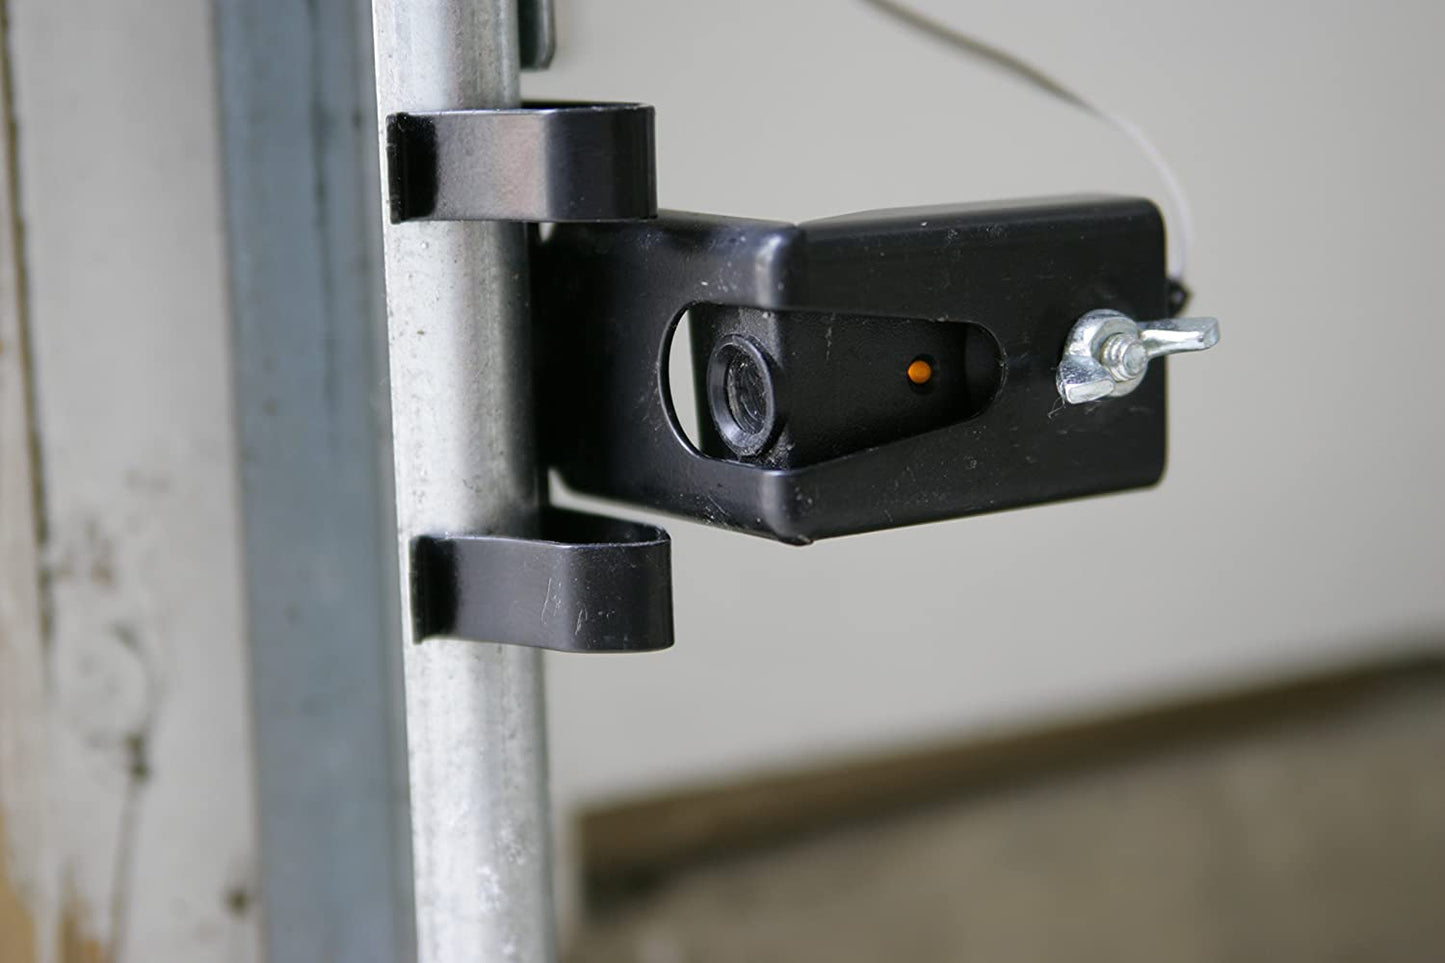 Garage Door Safety Sensors without Mounting Brackets for Liftmaster and Chamberlain Openers.